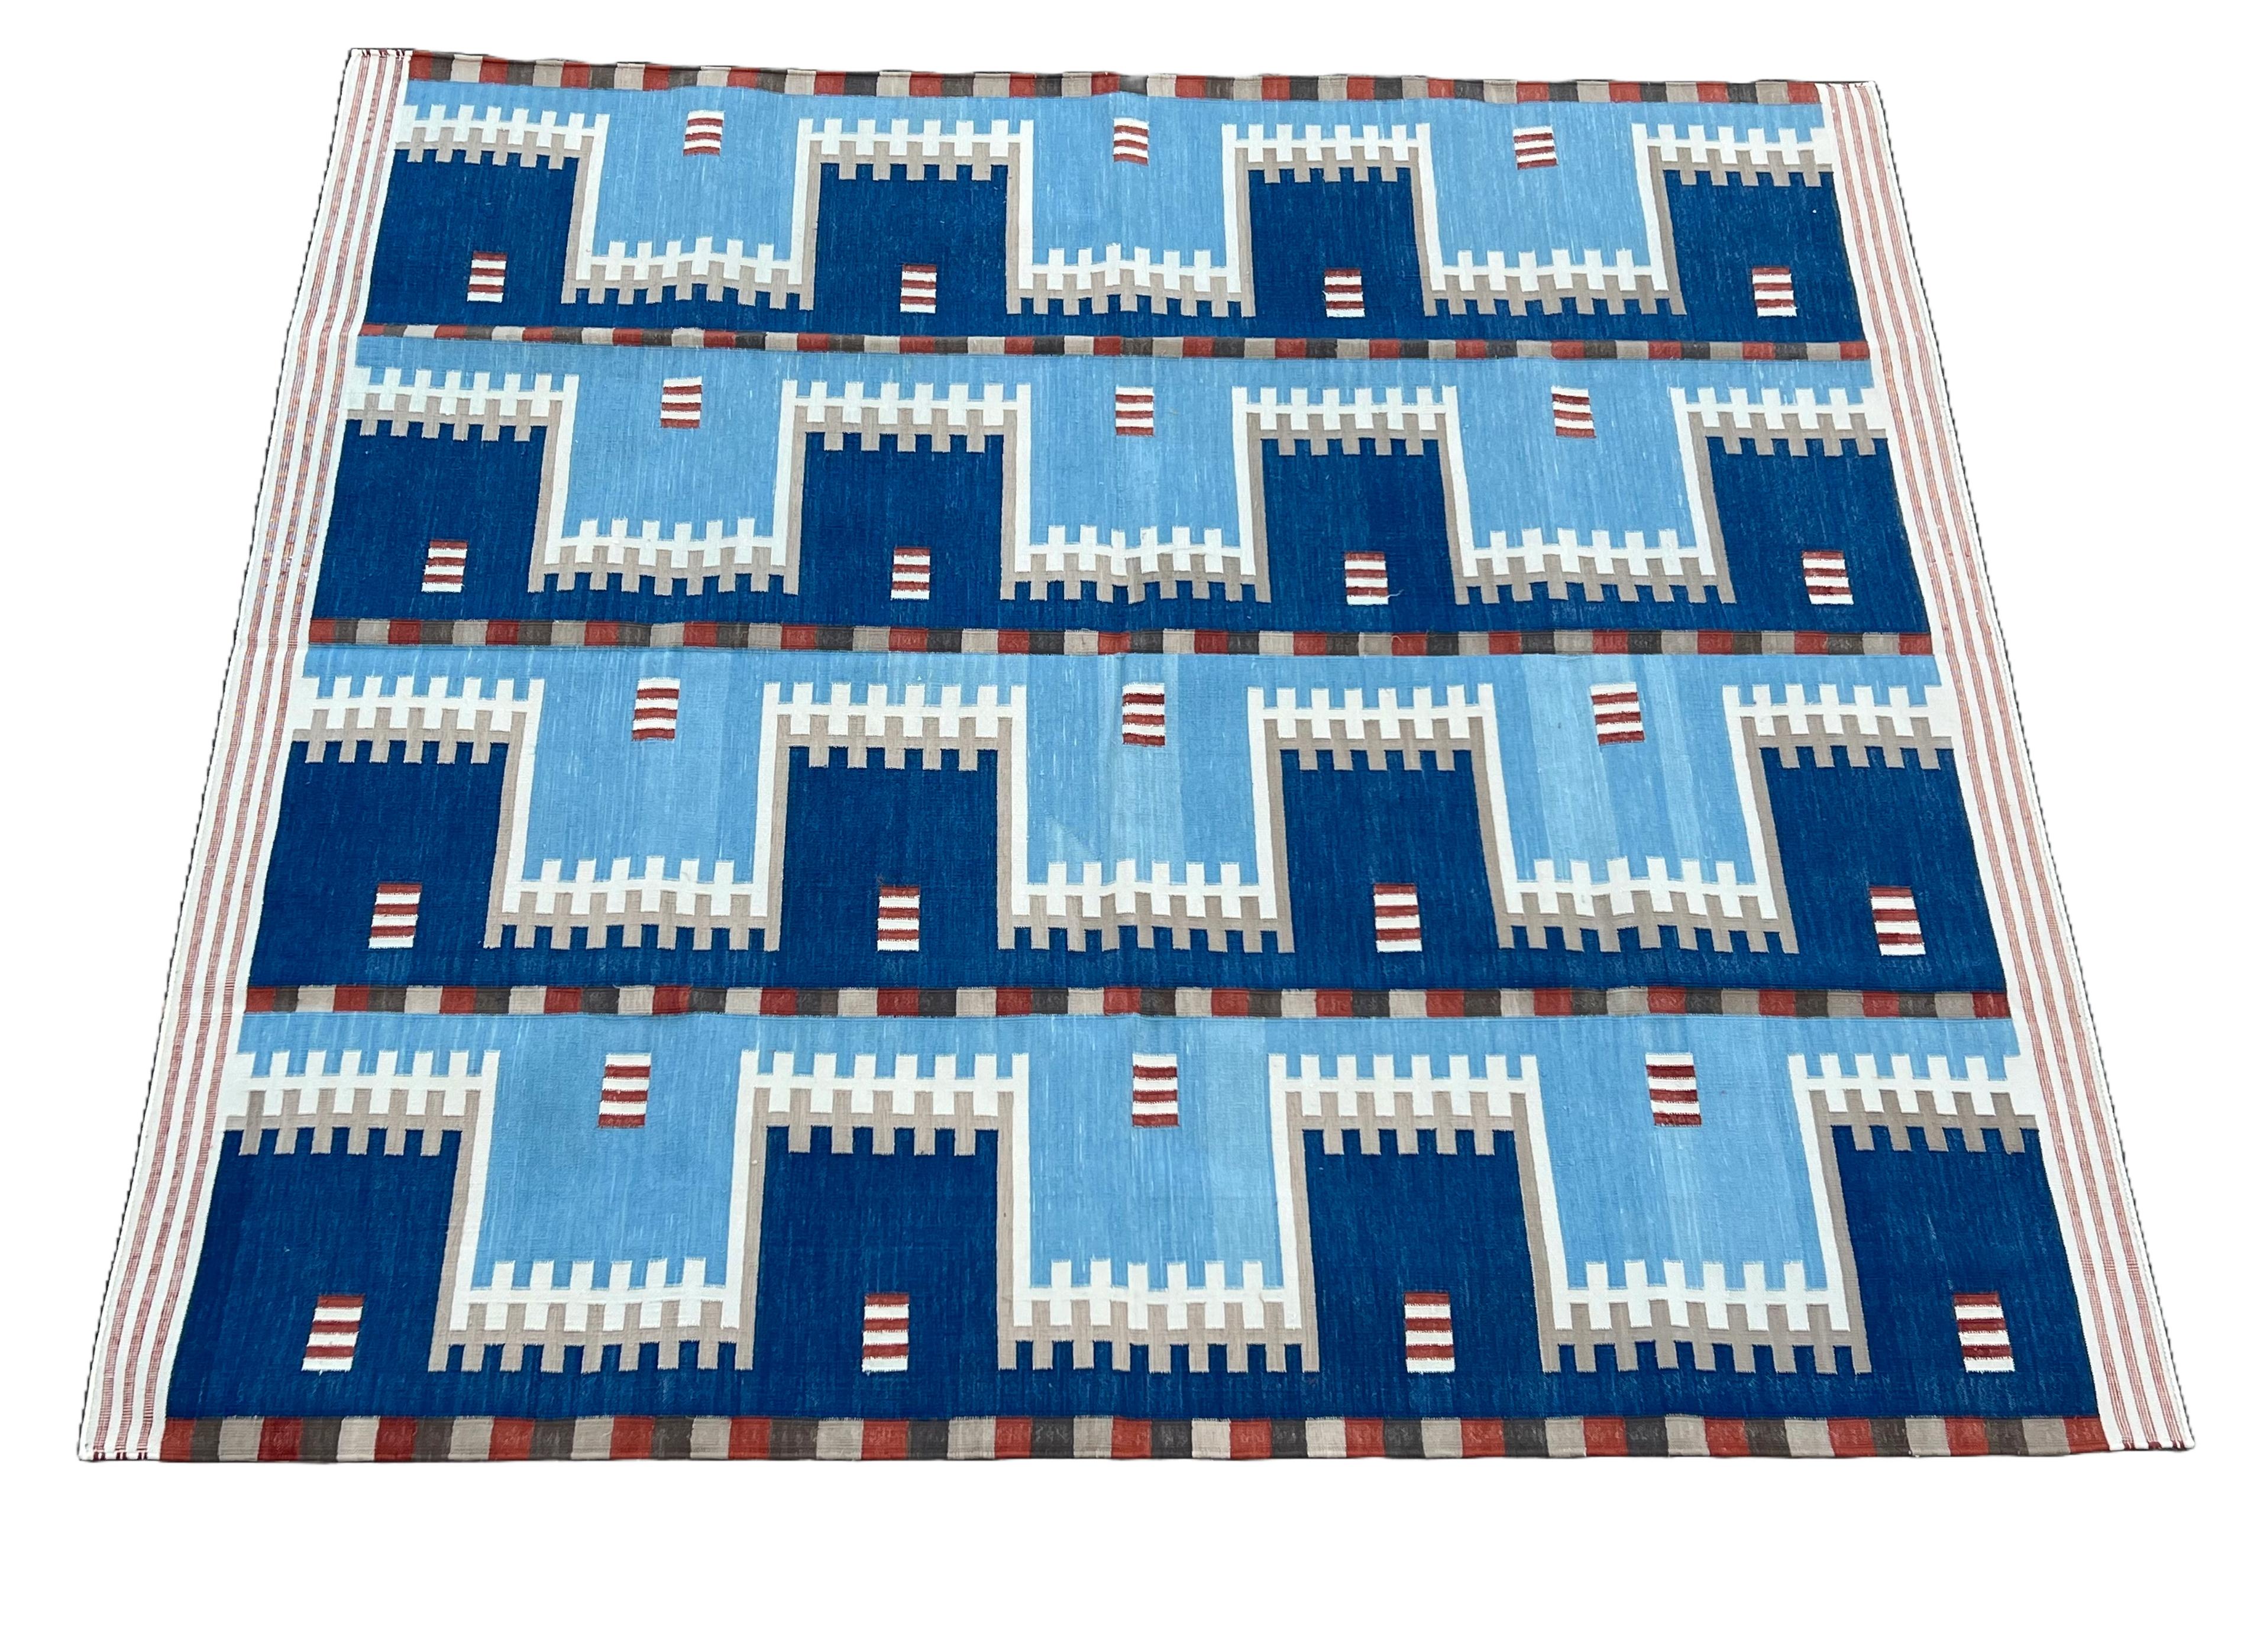 Hand-Woven Handmade Cotton Area Flat Weave Rug, Blue, Cream, Beige Geometric Indian Dhurrie For Sale